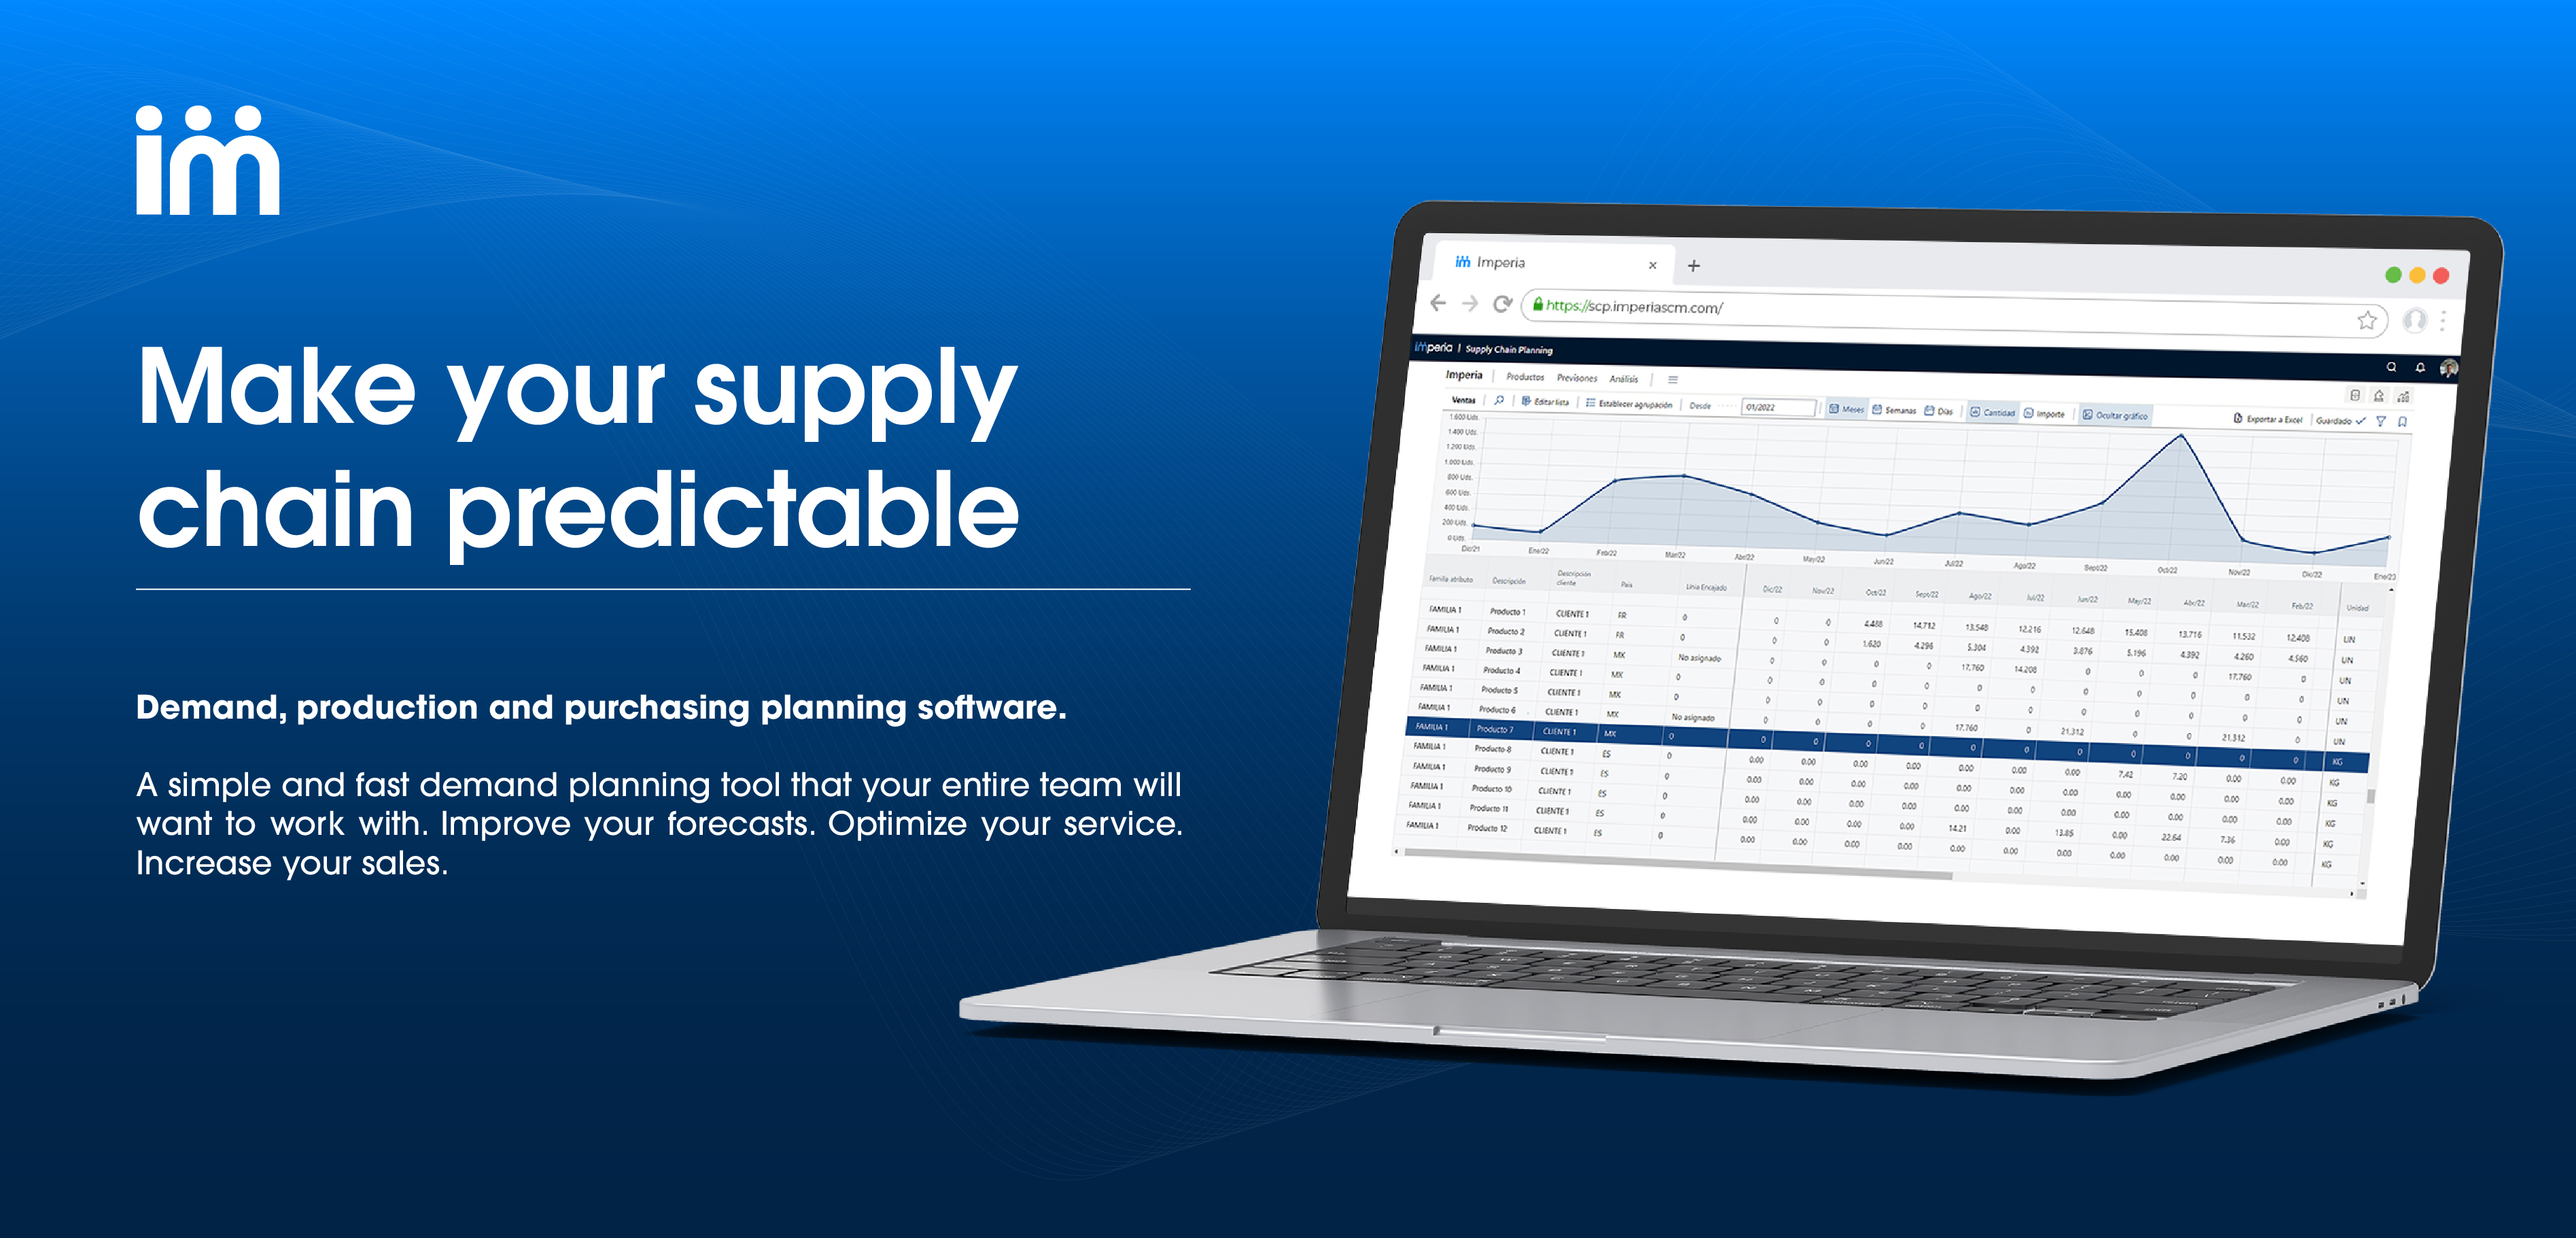 Make your supply chain predictable: Demand, production and purchasing planning software. A simple and fast demand planning tool that your entire team will want to work with. Improve your forecasts. Optimize your service. Increase your sales.